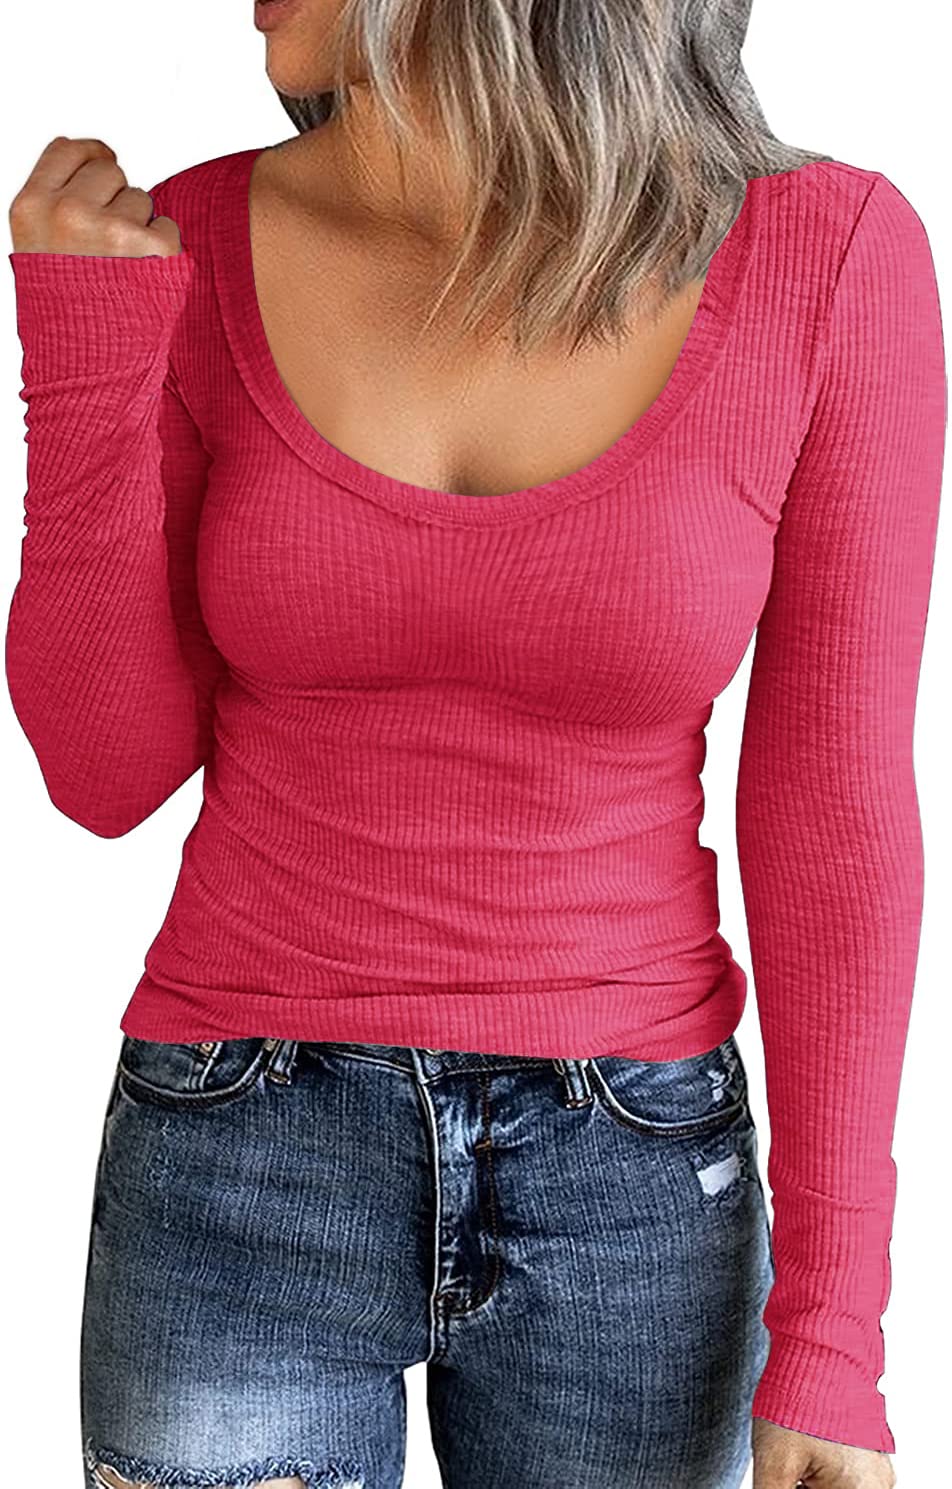 Roselux Women Long Sleeve Scoop Neck Ribbed Fitted Knit Shirt Cotton Basic Thermal Henley Tops (Hot Pink Xl)